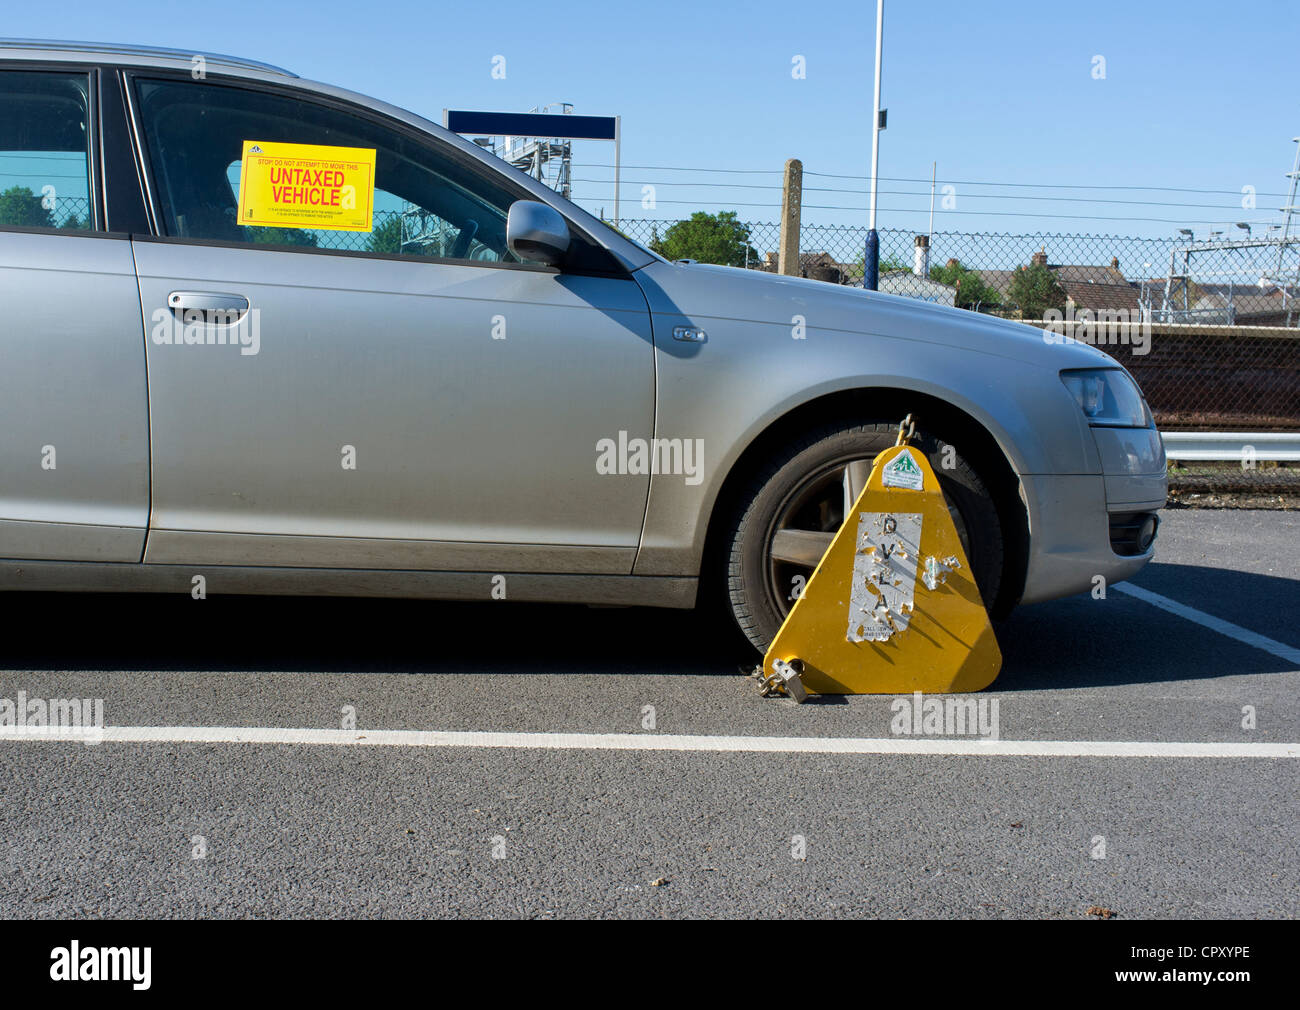 Untaxed car clamped in public car park Stock Photo